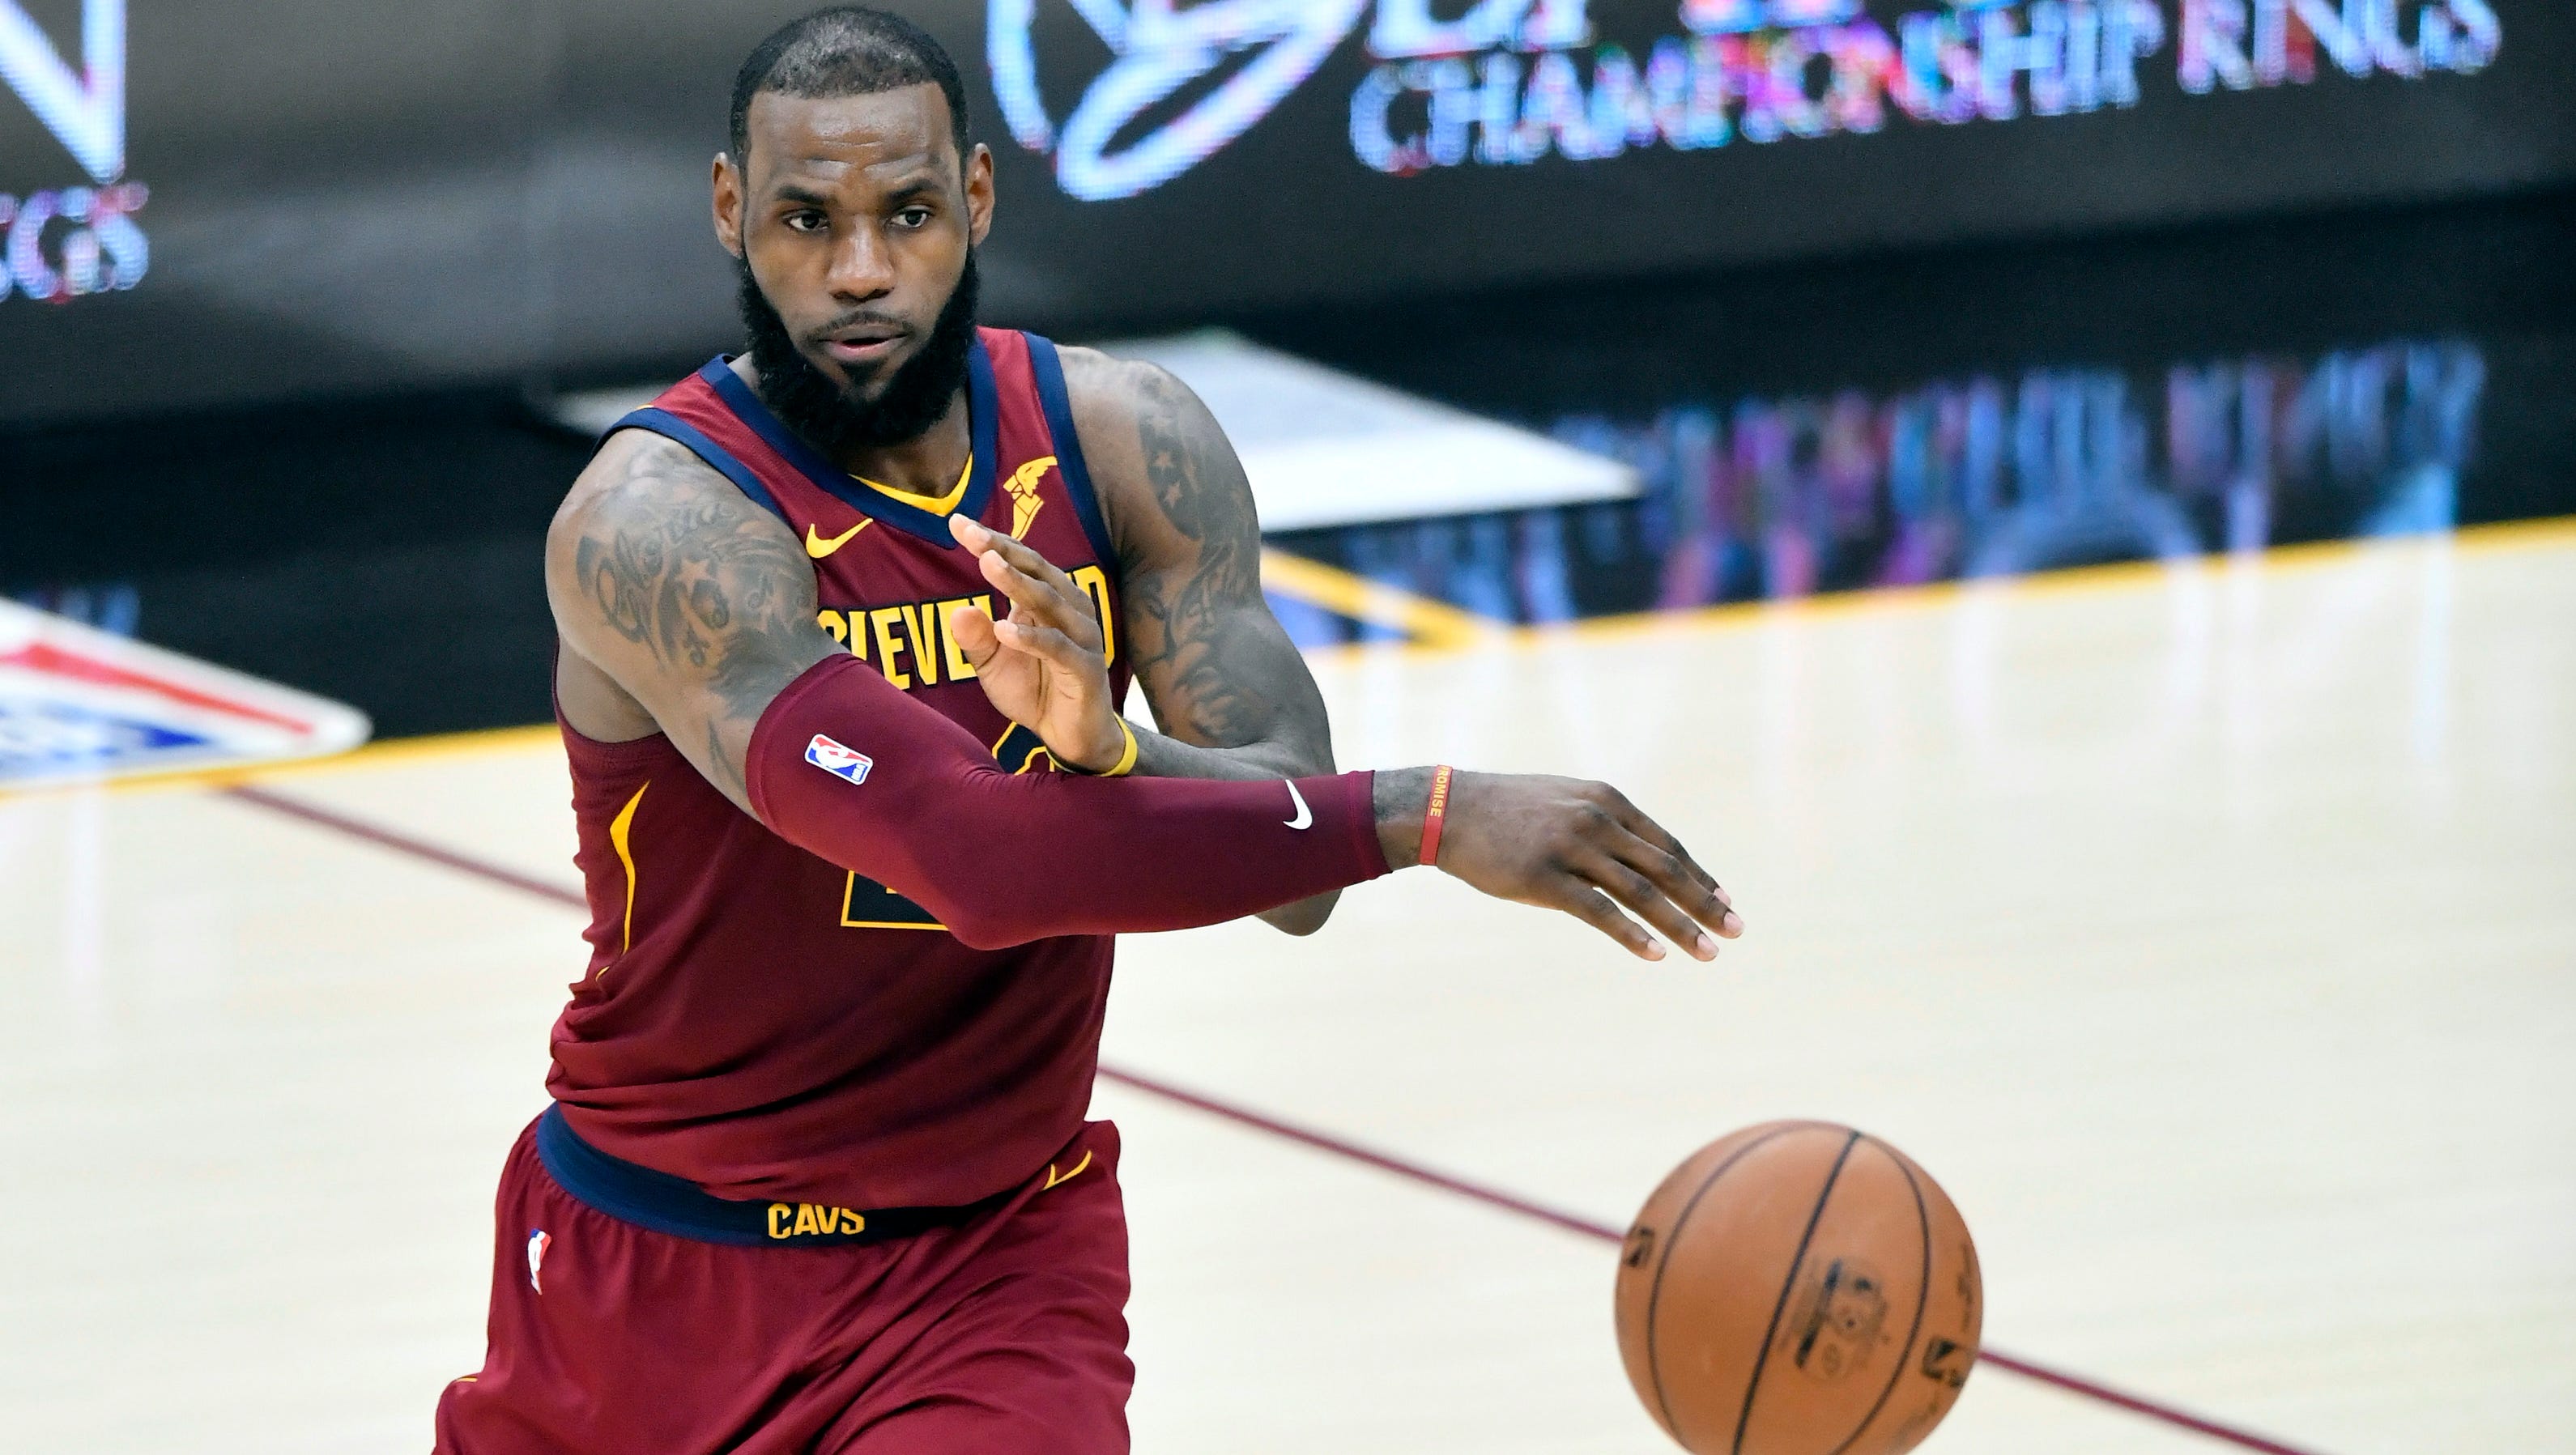 LeBron James Passing prowess puts him in rarefied NBA position